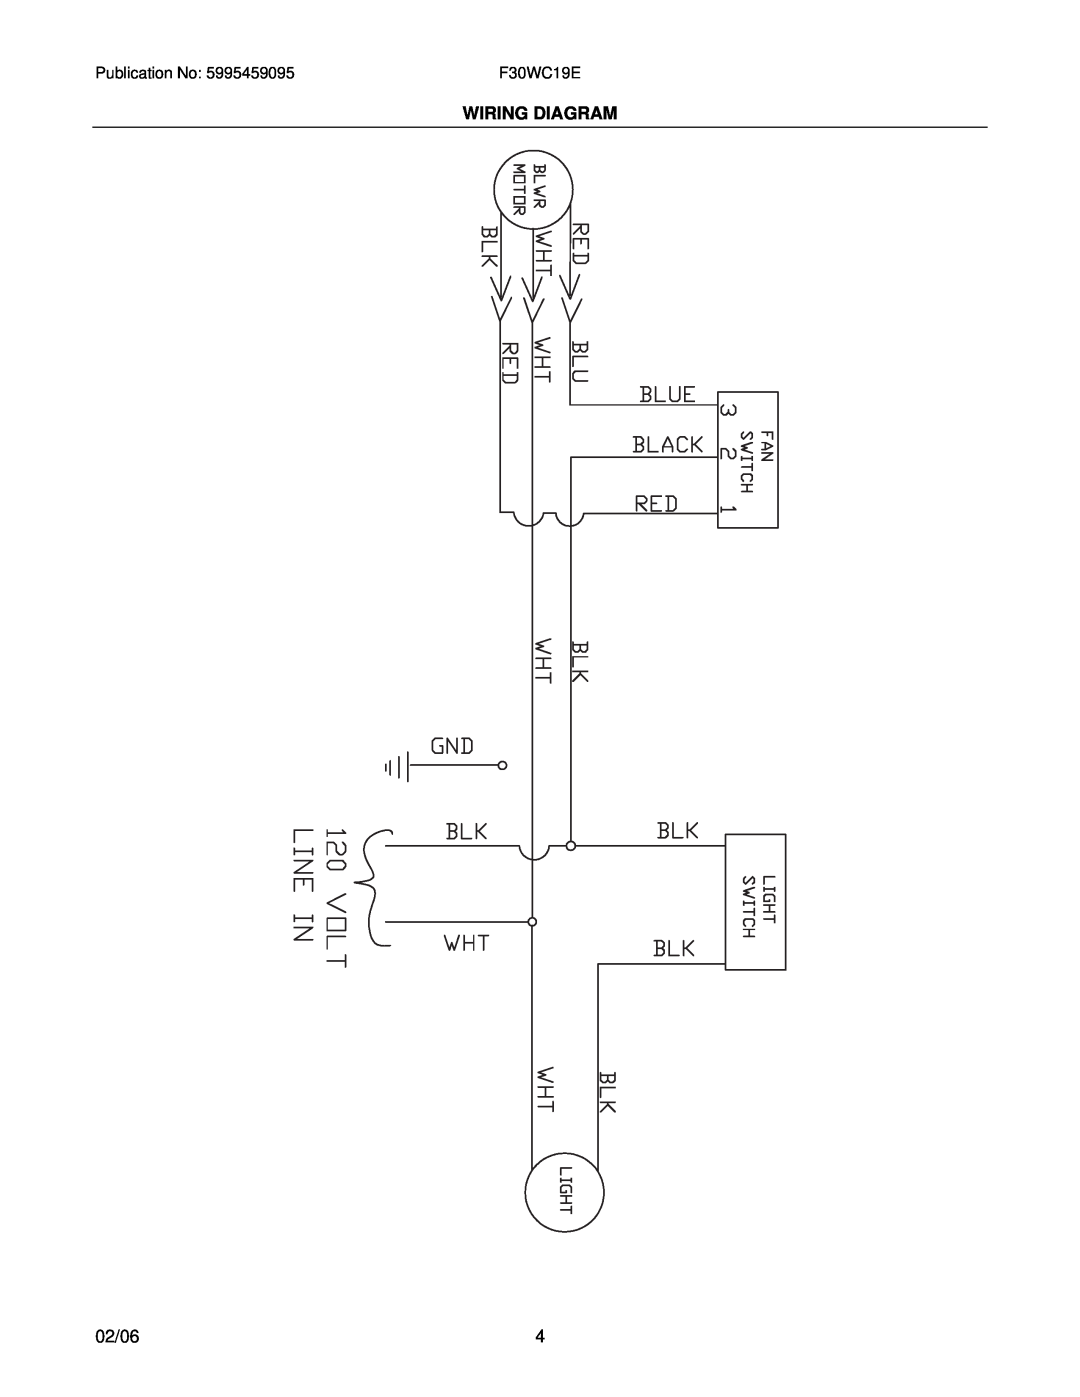 Electrolux F30WC19E installation instructions Wiring Diagram, 02/06 